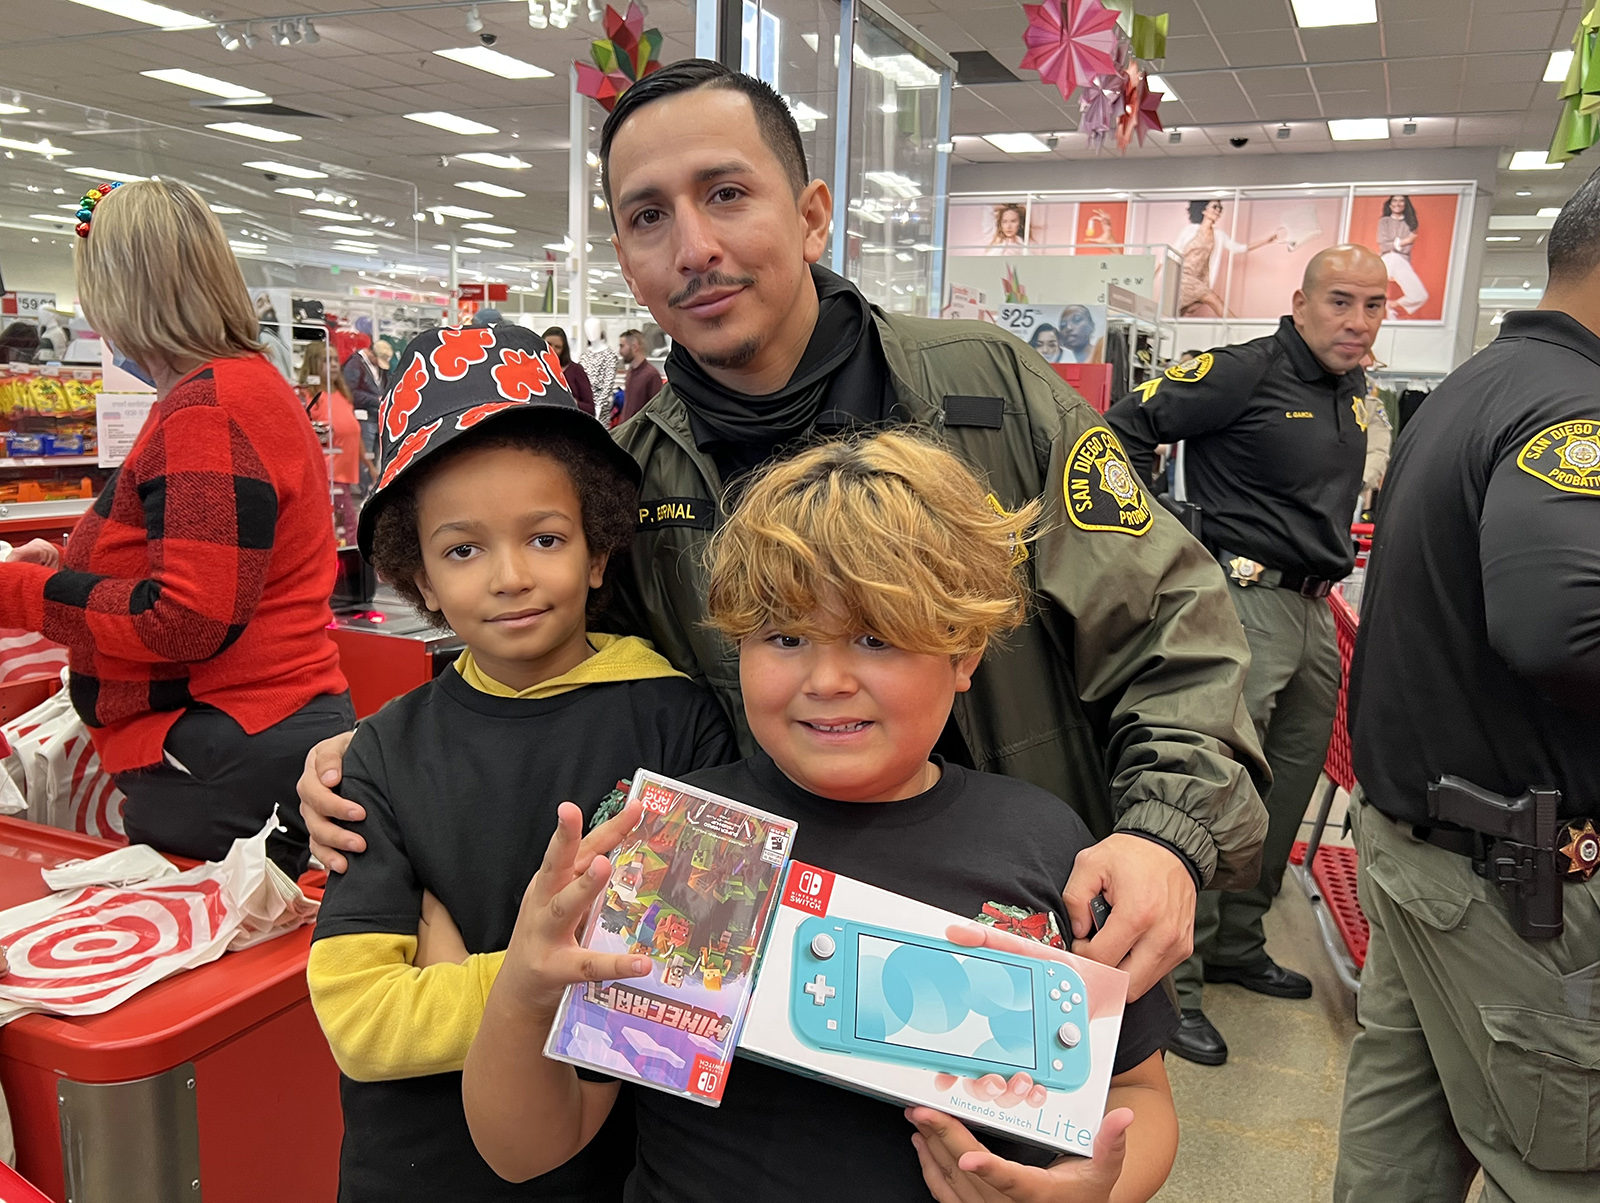 Probation Officer and two children shopping